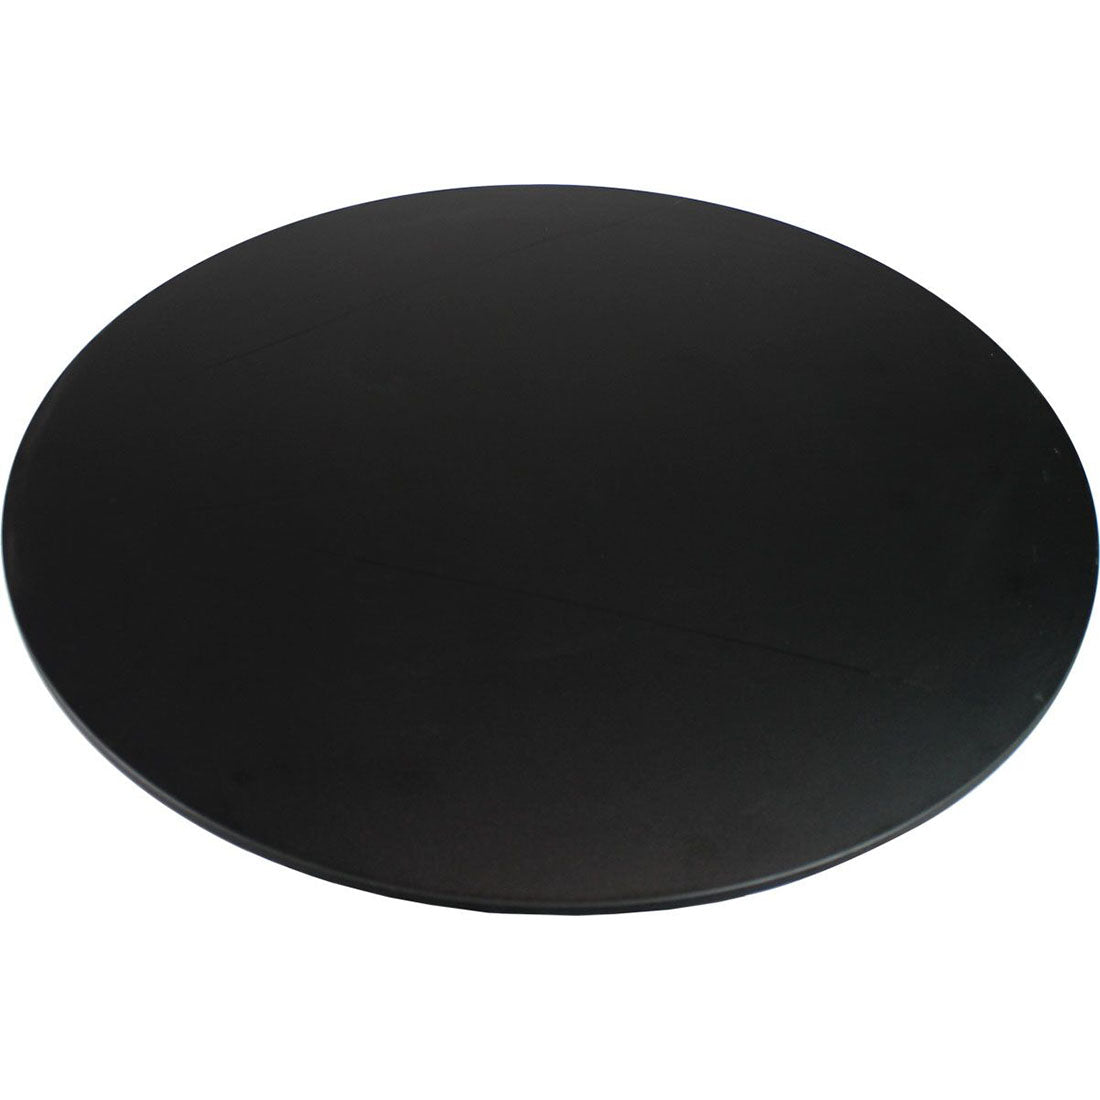 Compact Laminate 700mm Round Table Top - switchoffice.com.au